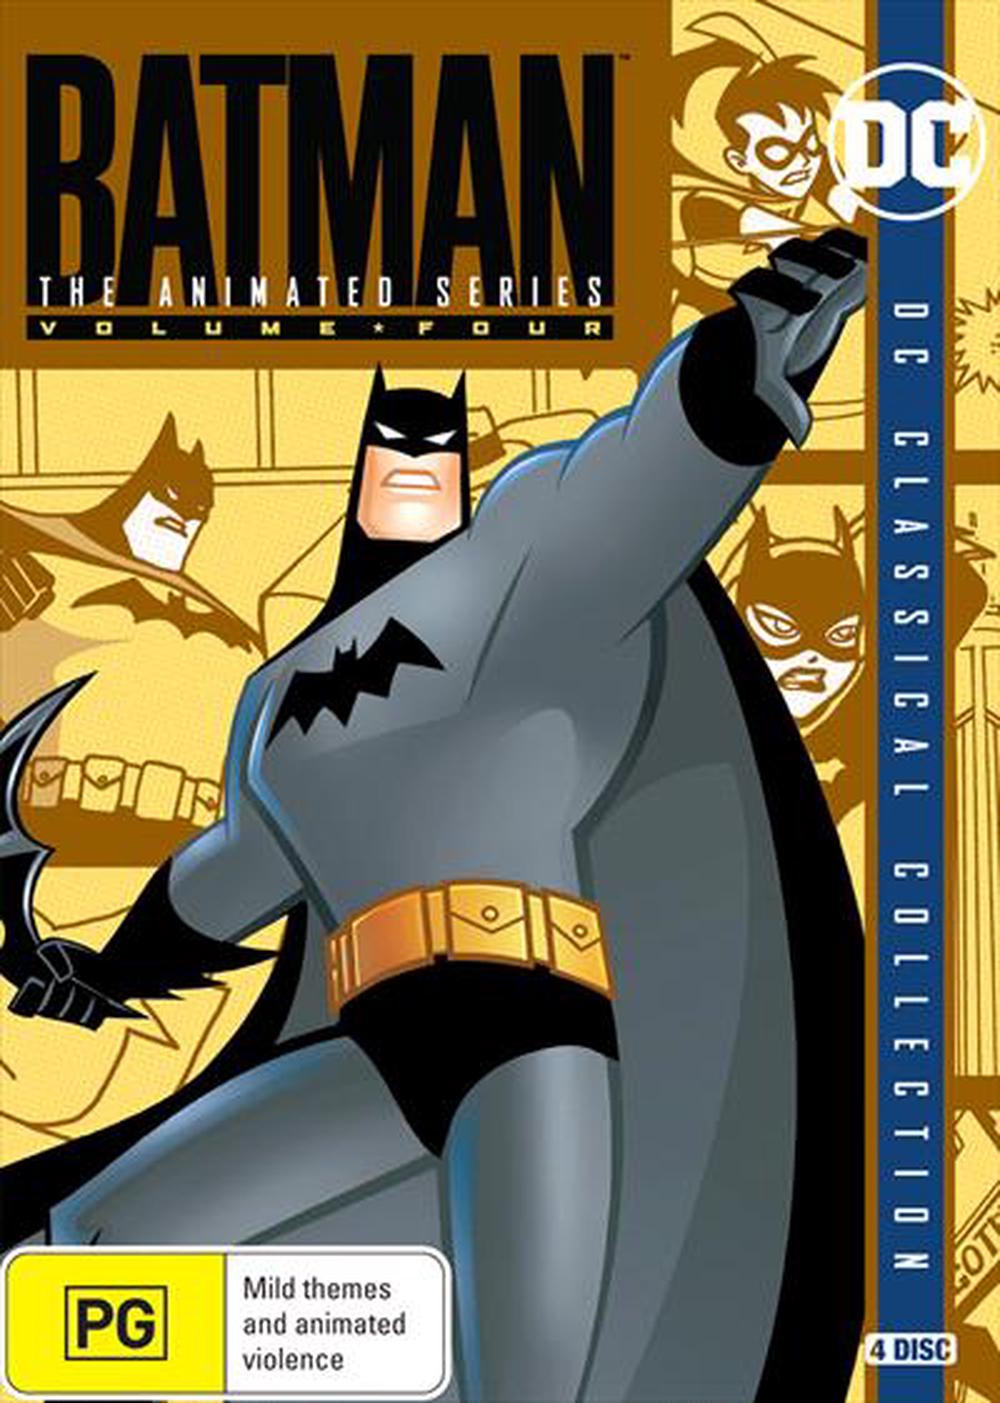 Batman - Animated Series, The : Vol 4, DVD | Buy online at The Nile